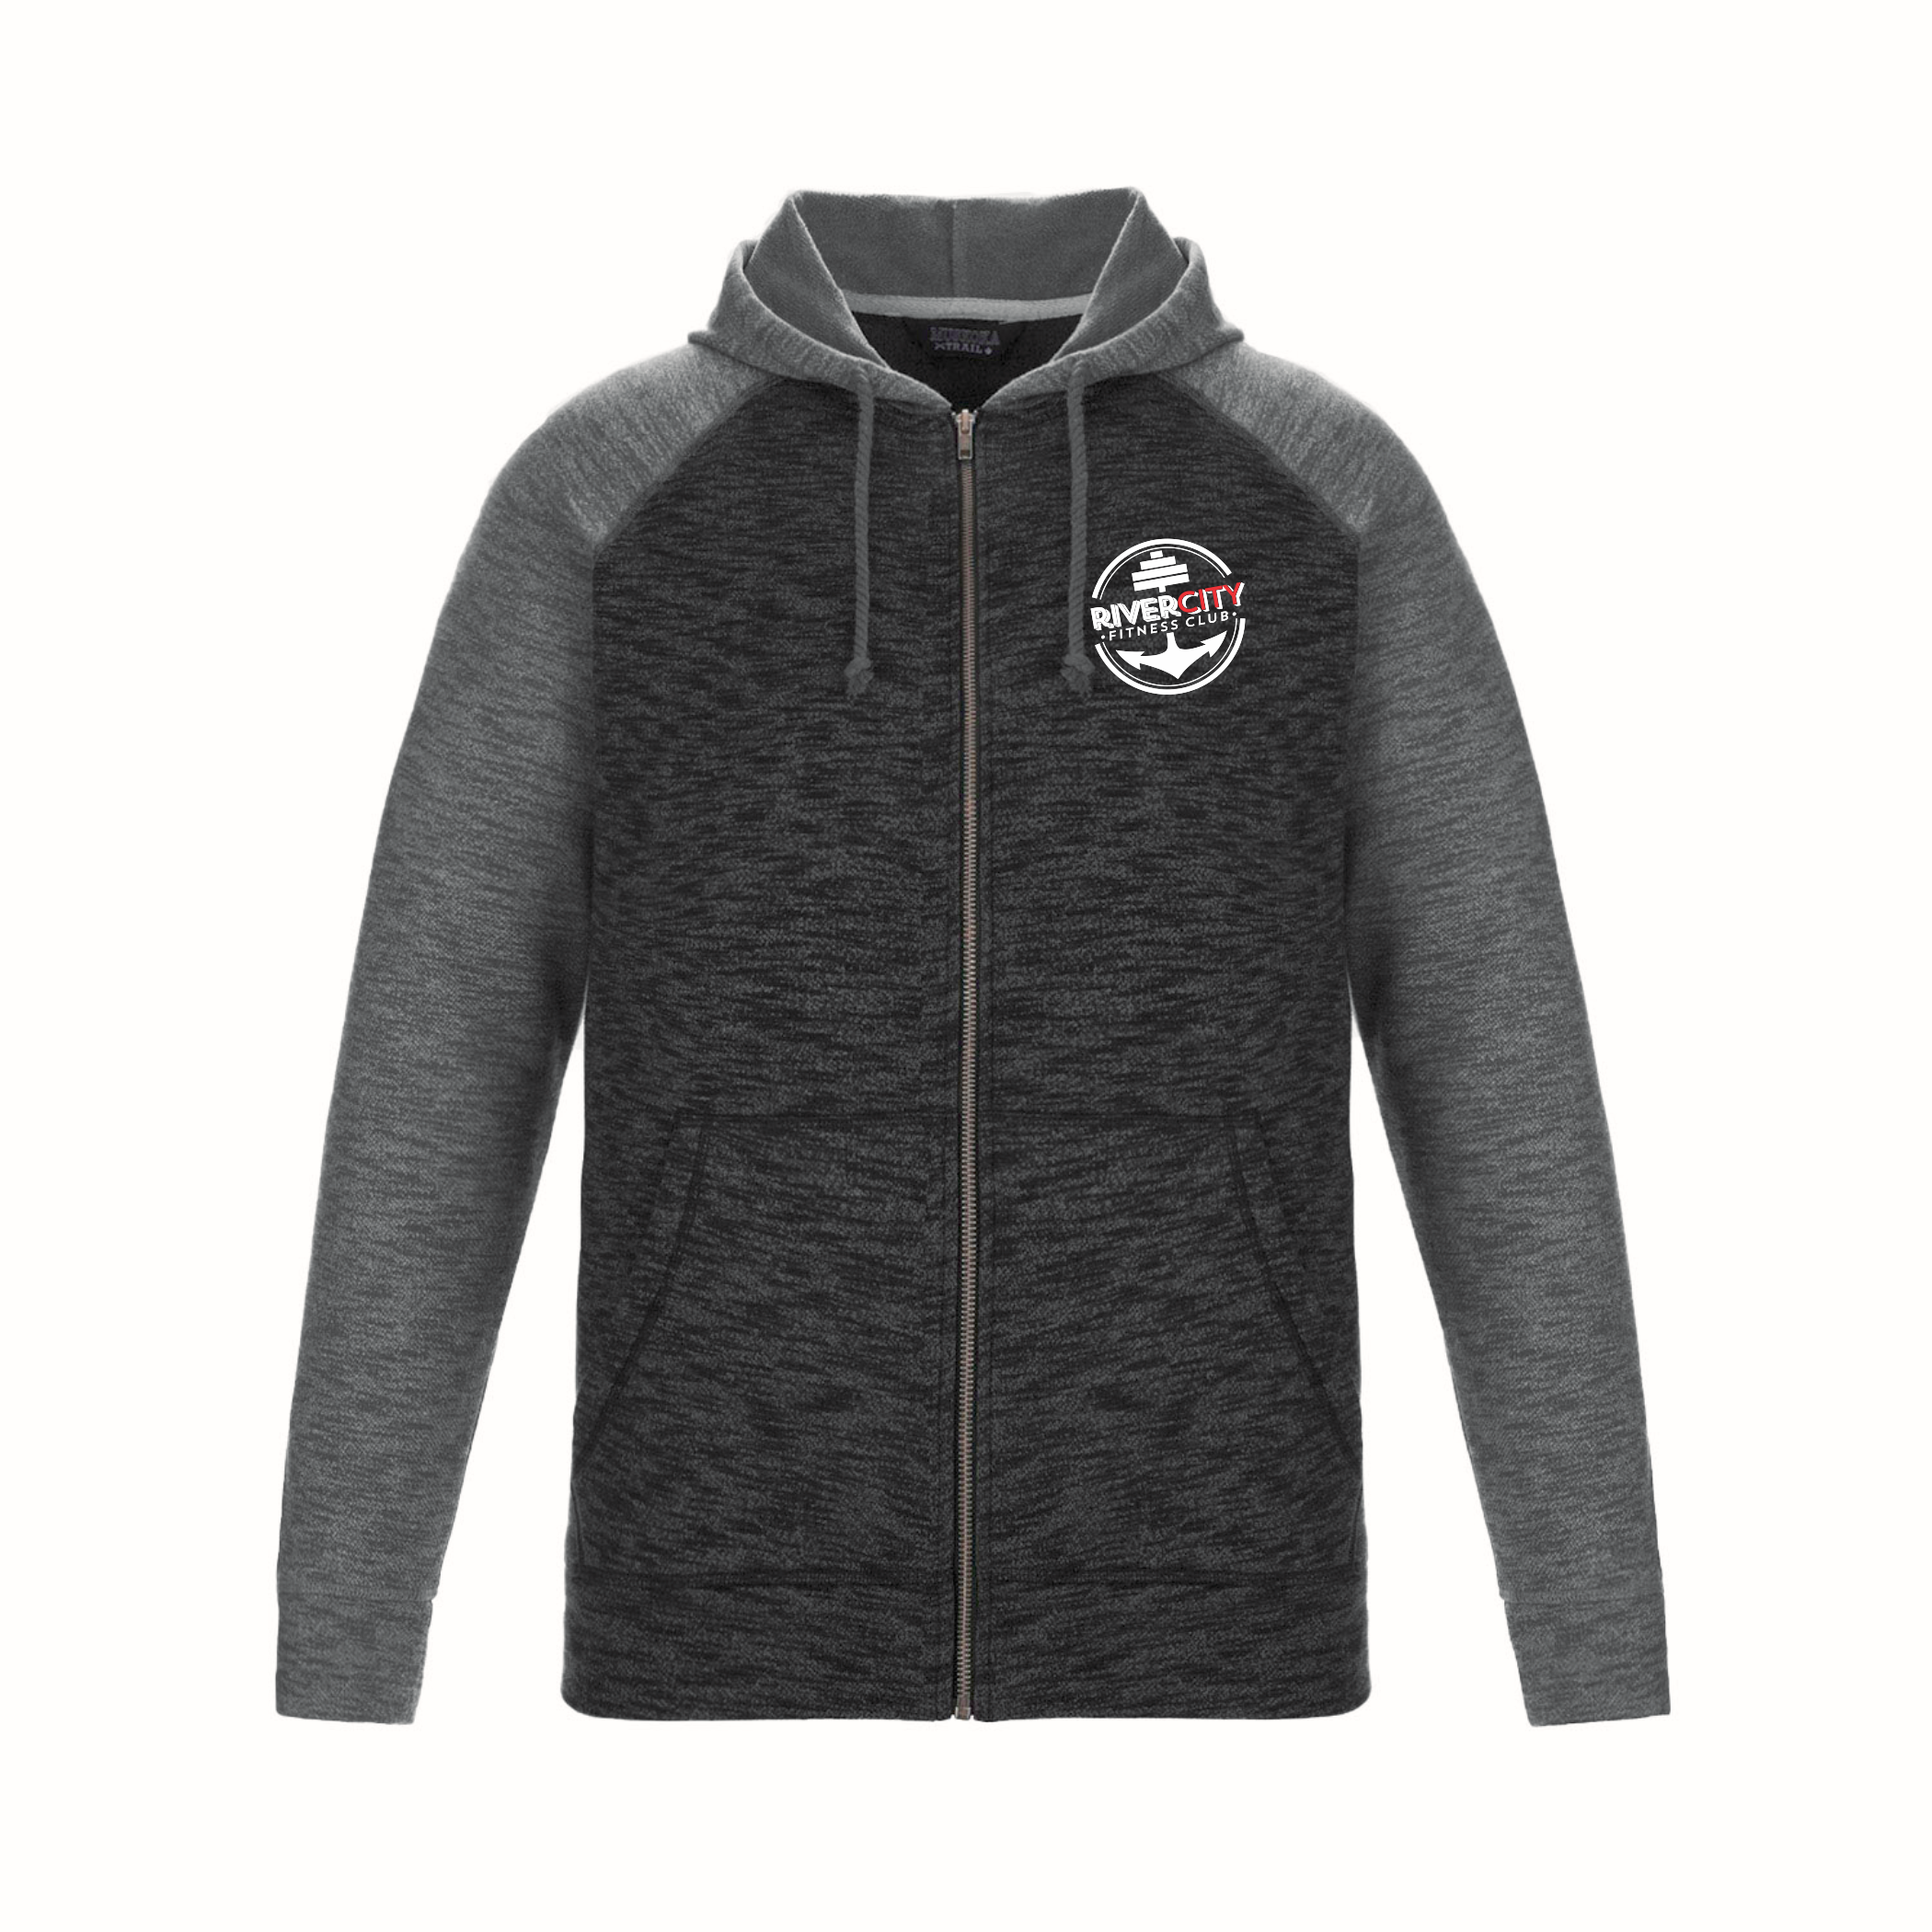 River City Fitness - Full Zip Hoodie - Two Tone